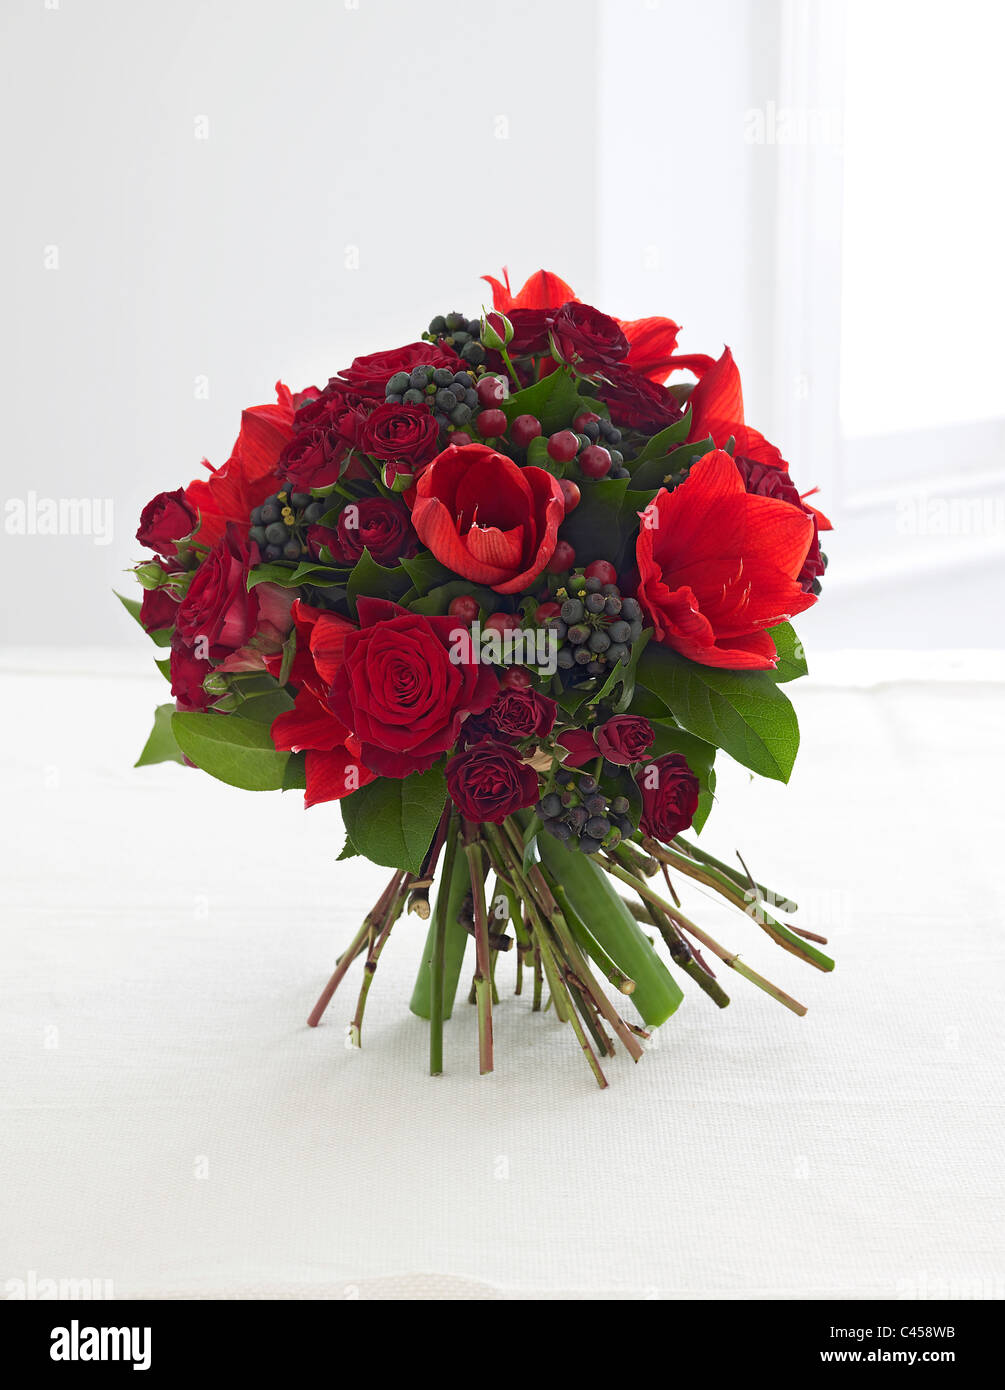 Bunch of flowers including roses, amaryllis, hypericum, berries, close-up Stock Photo